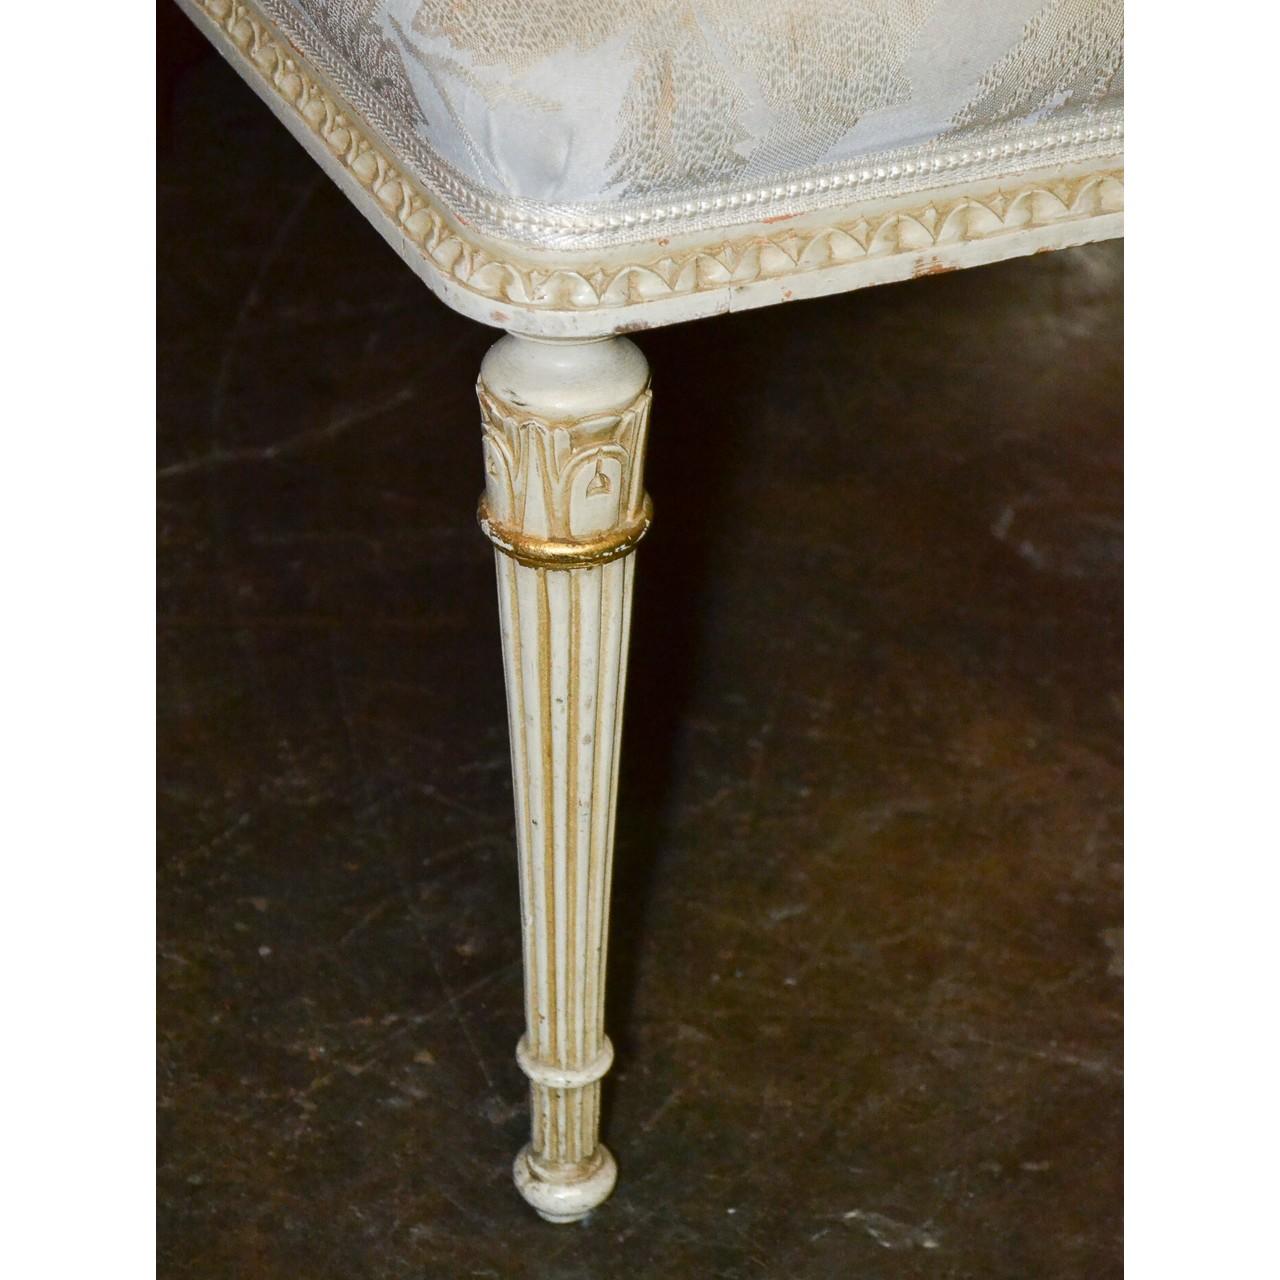 Elegant 19th century French Louis XVI style parcel-gilt and painted bench with upholstered top. Hard-carved and raise on tapered and fluted legs,

circa 1890.